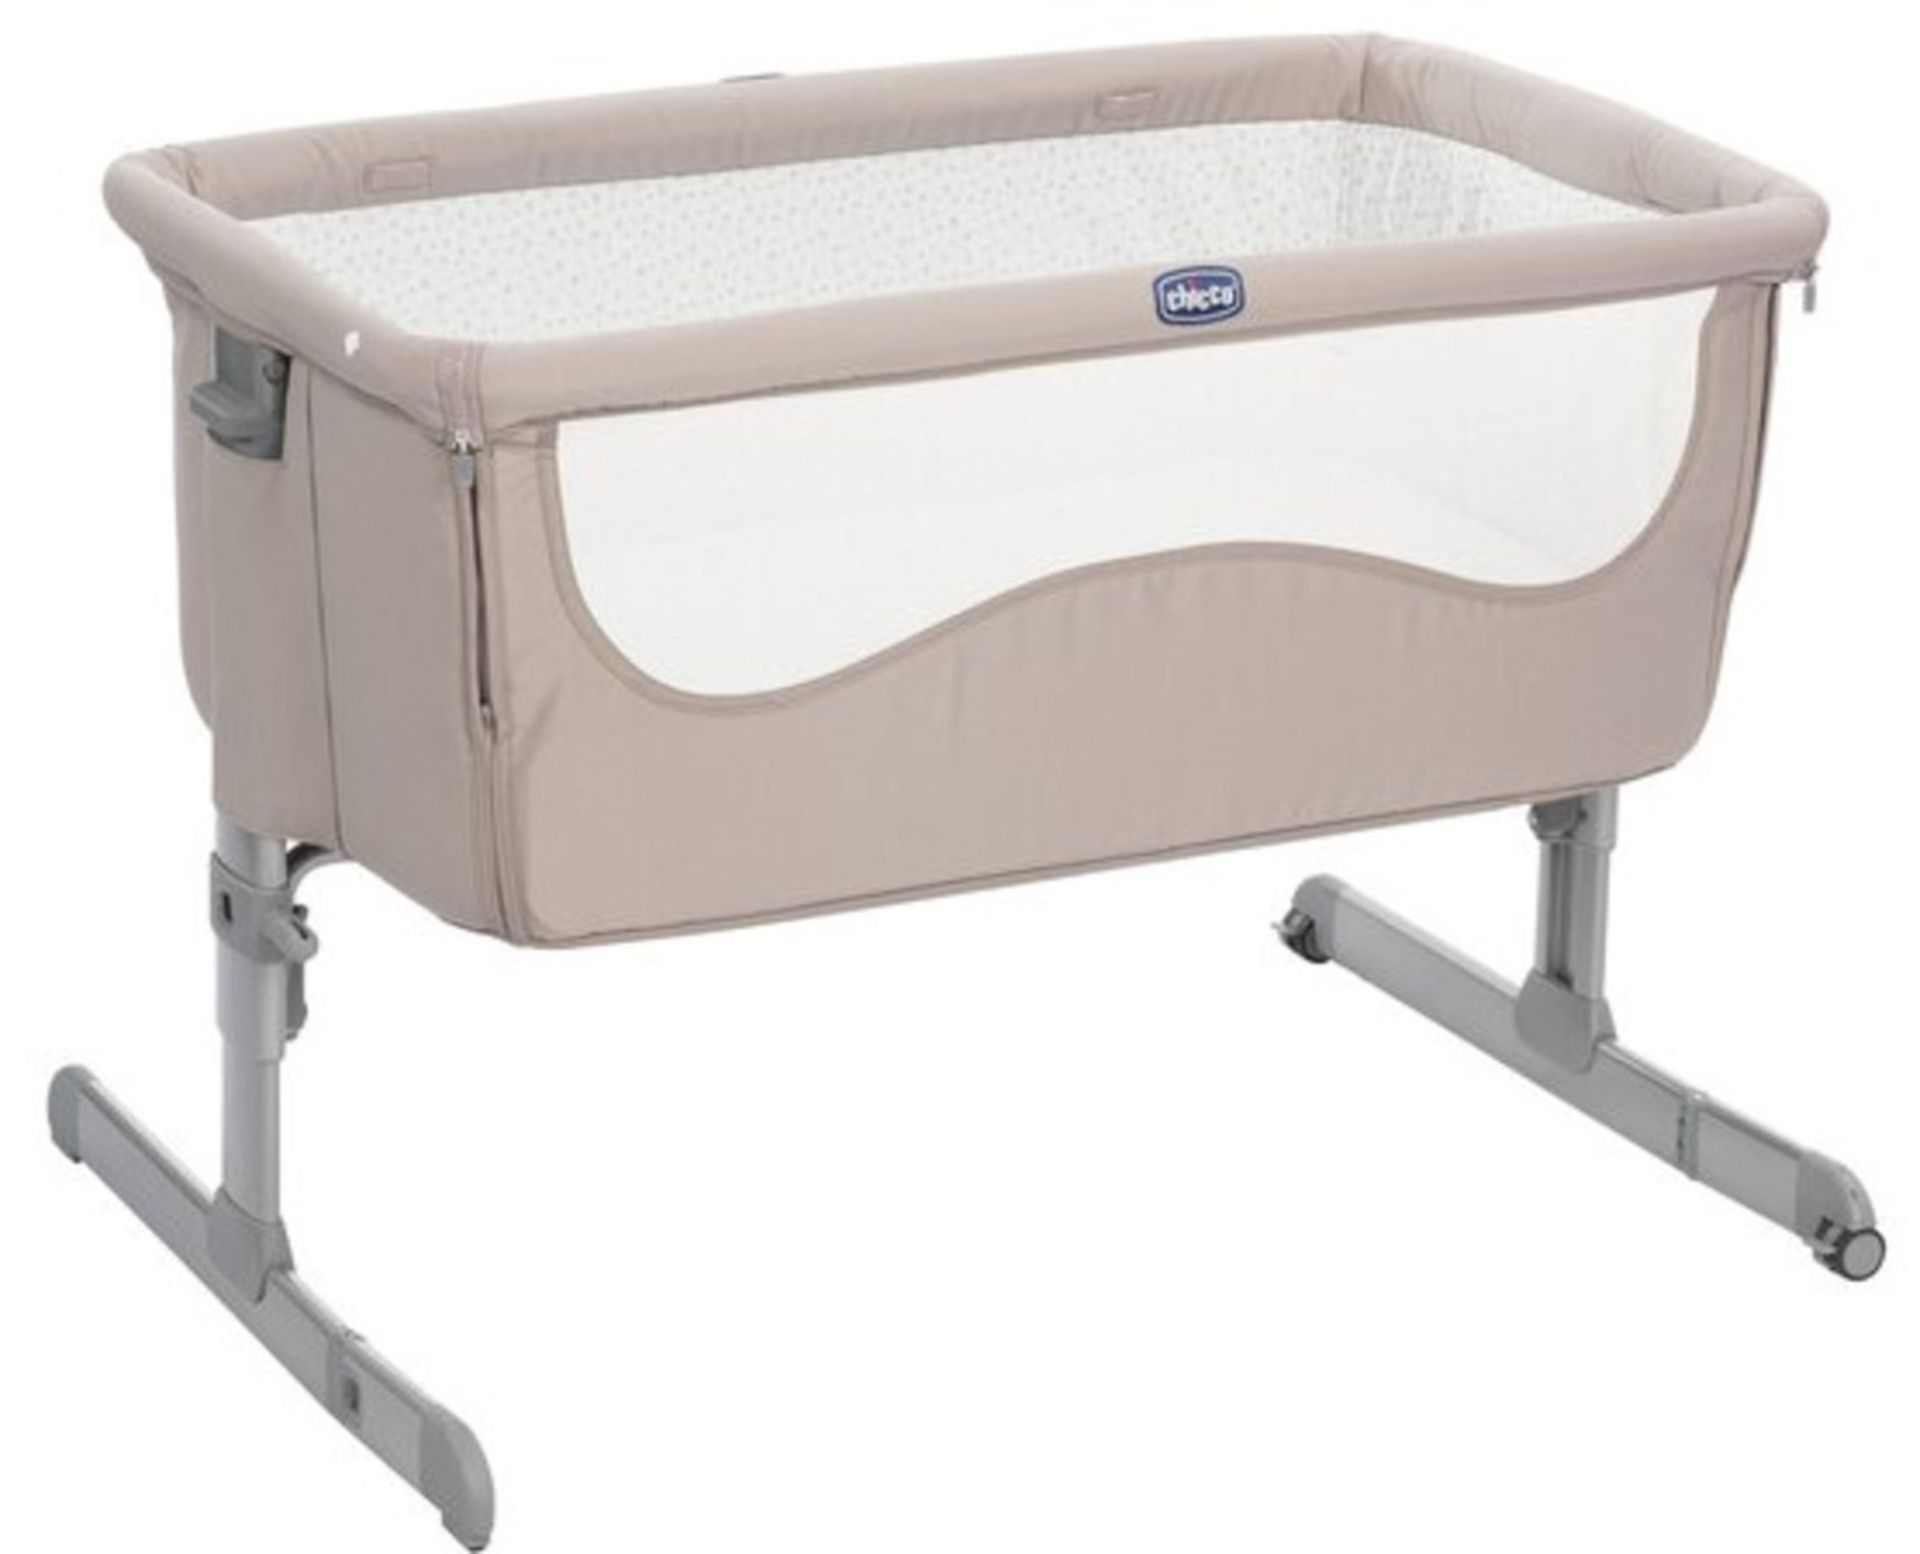 1 x Chicco Next2me Chick to Chick Bedside Baby Crib - Brand New Sealed Stock - Includes Mattress -